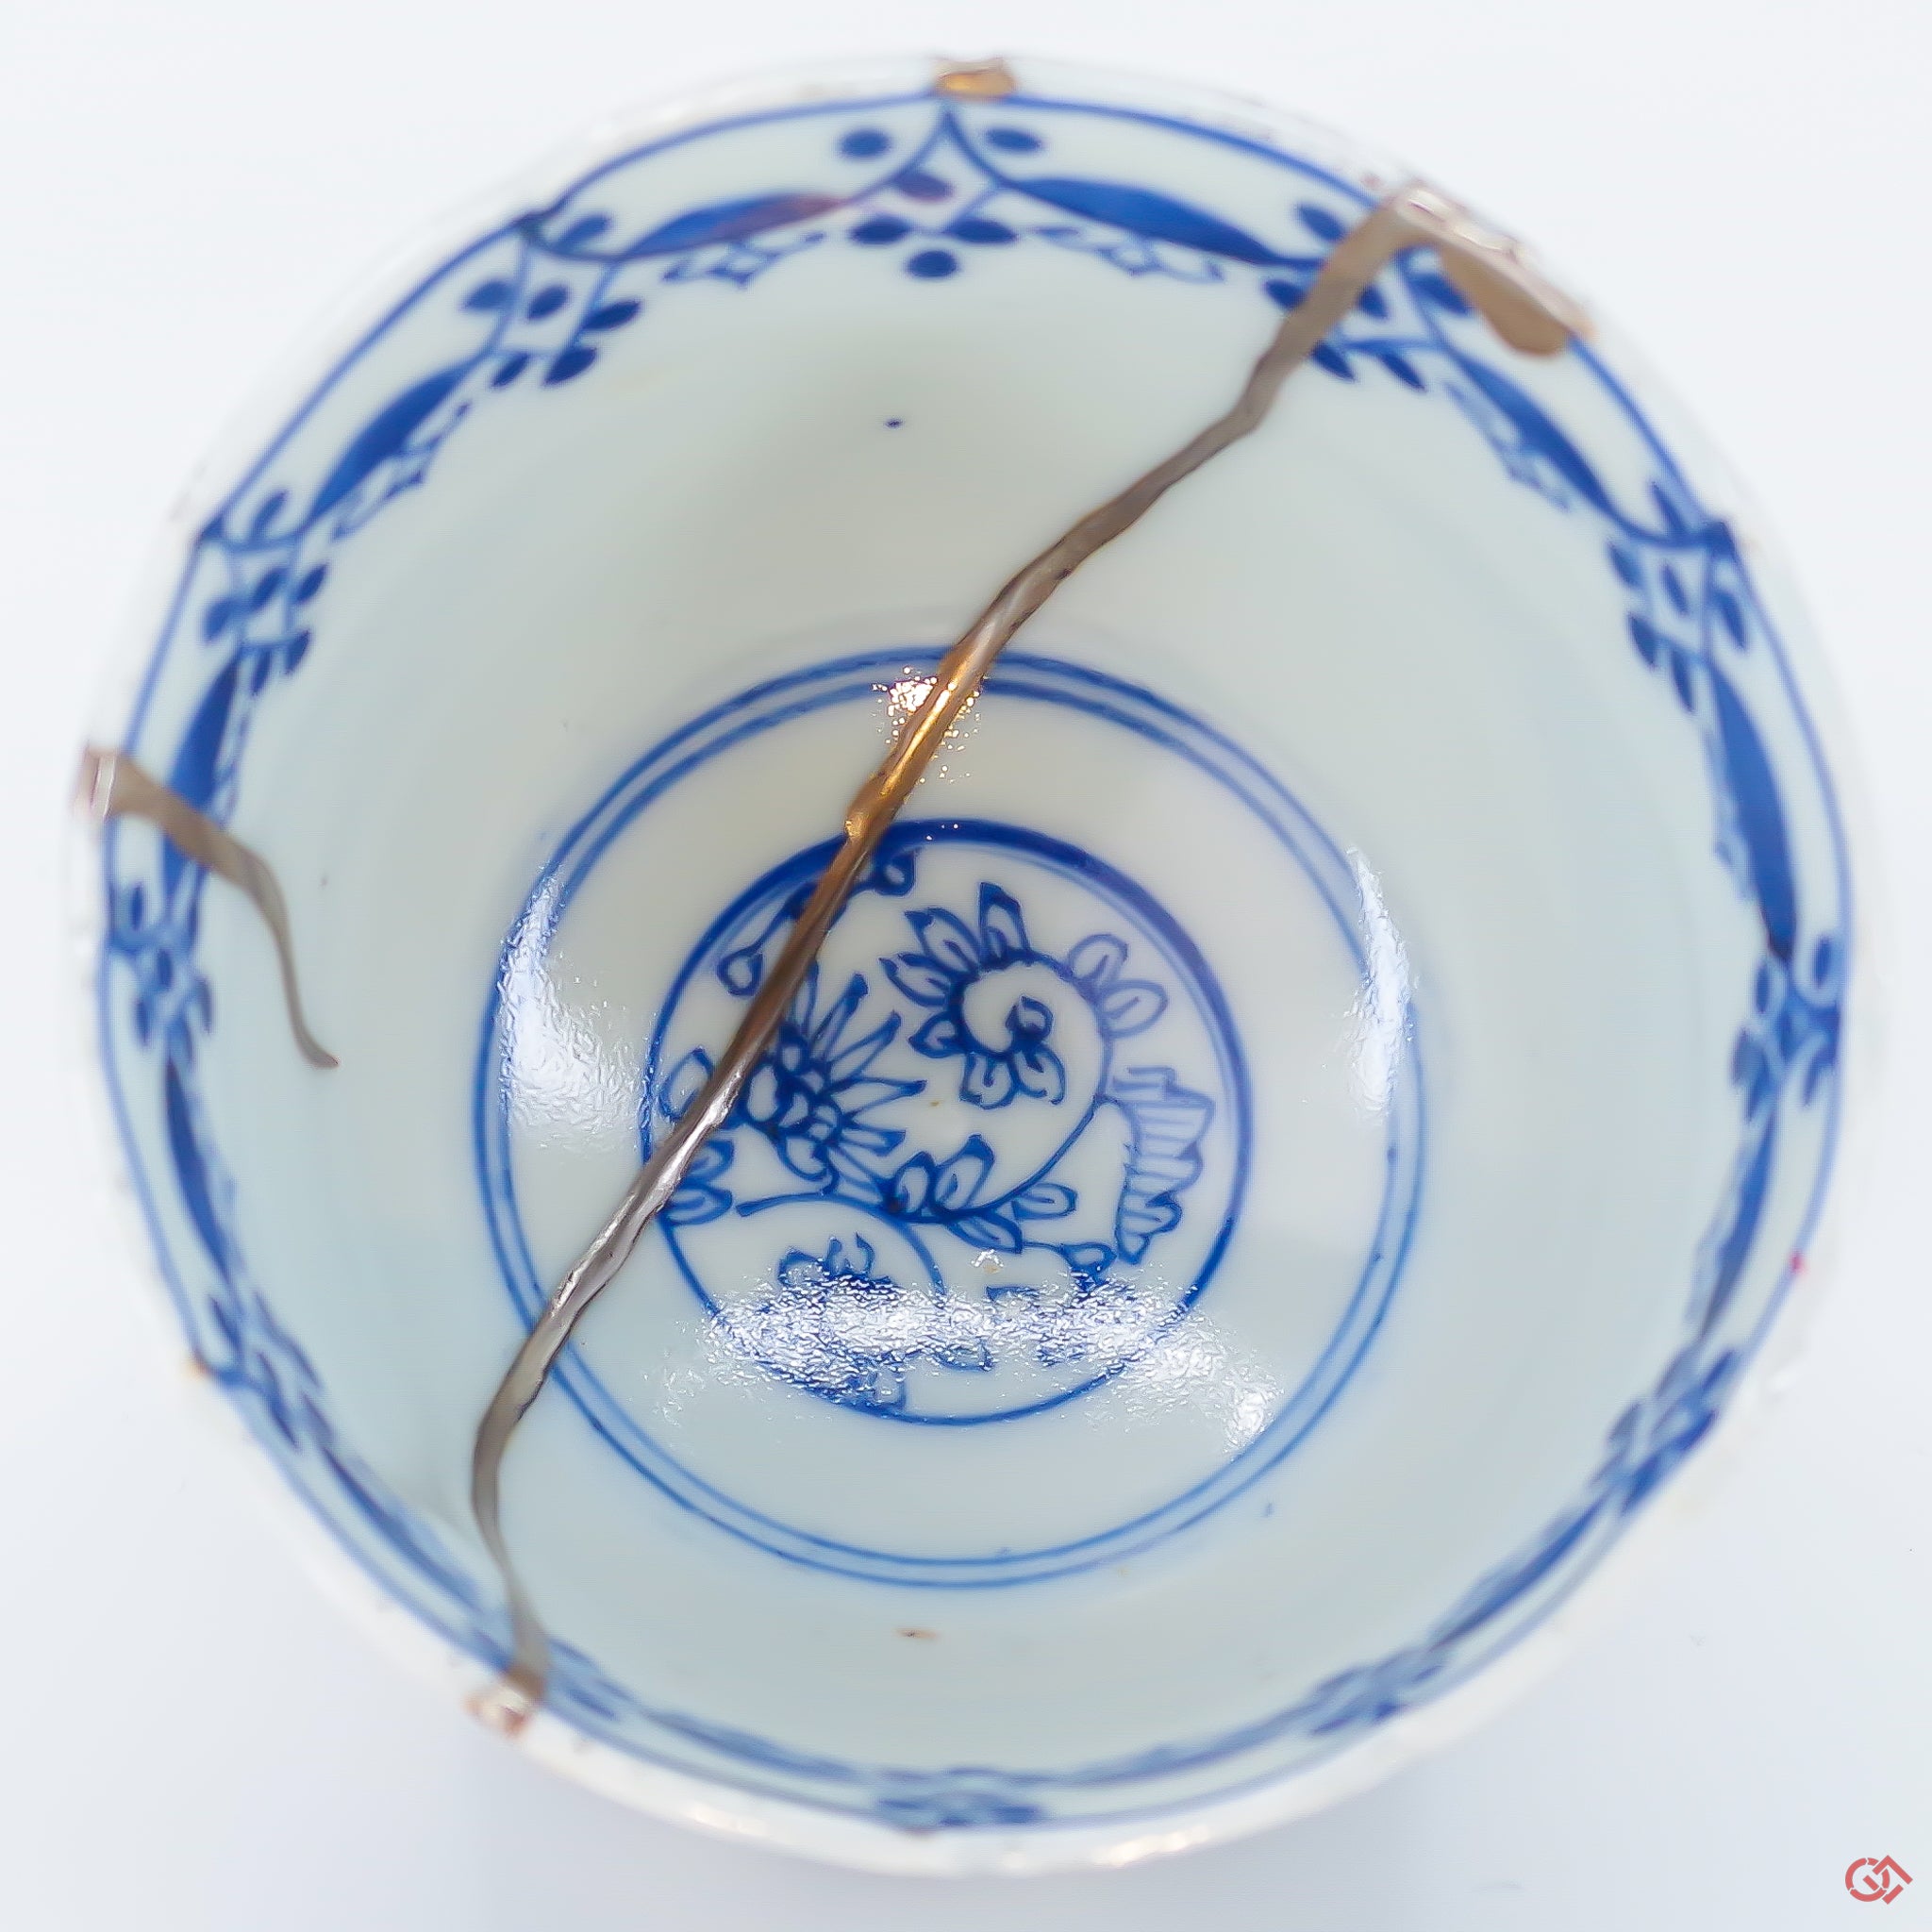 A close-up photo of an authentic Kintsugi pottery piece, showing the detail of its repairs and craftsmanship.